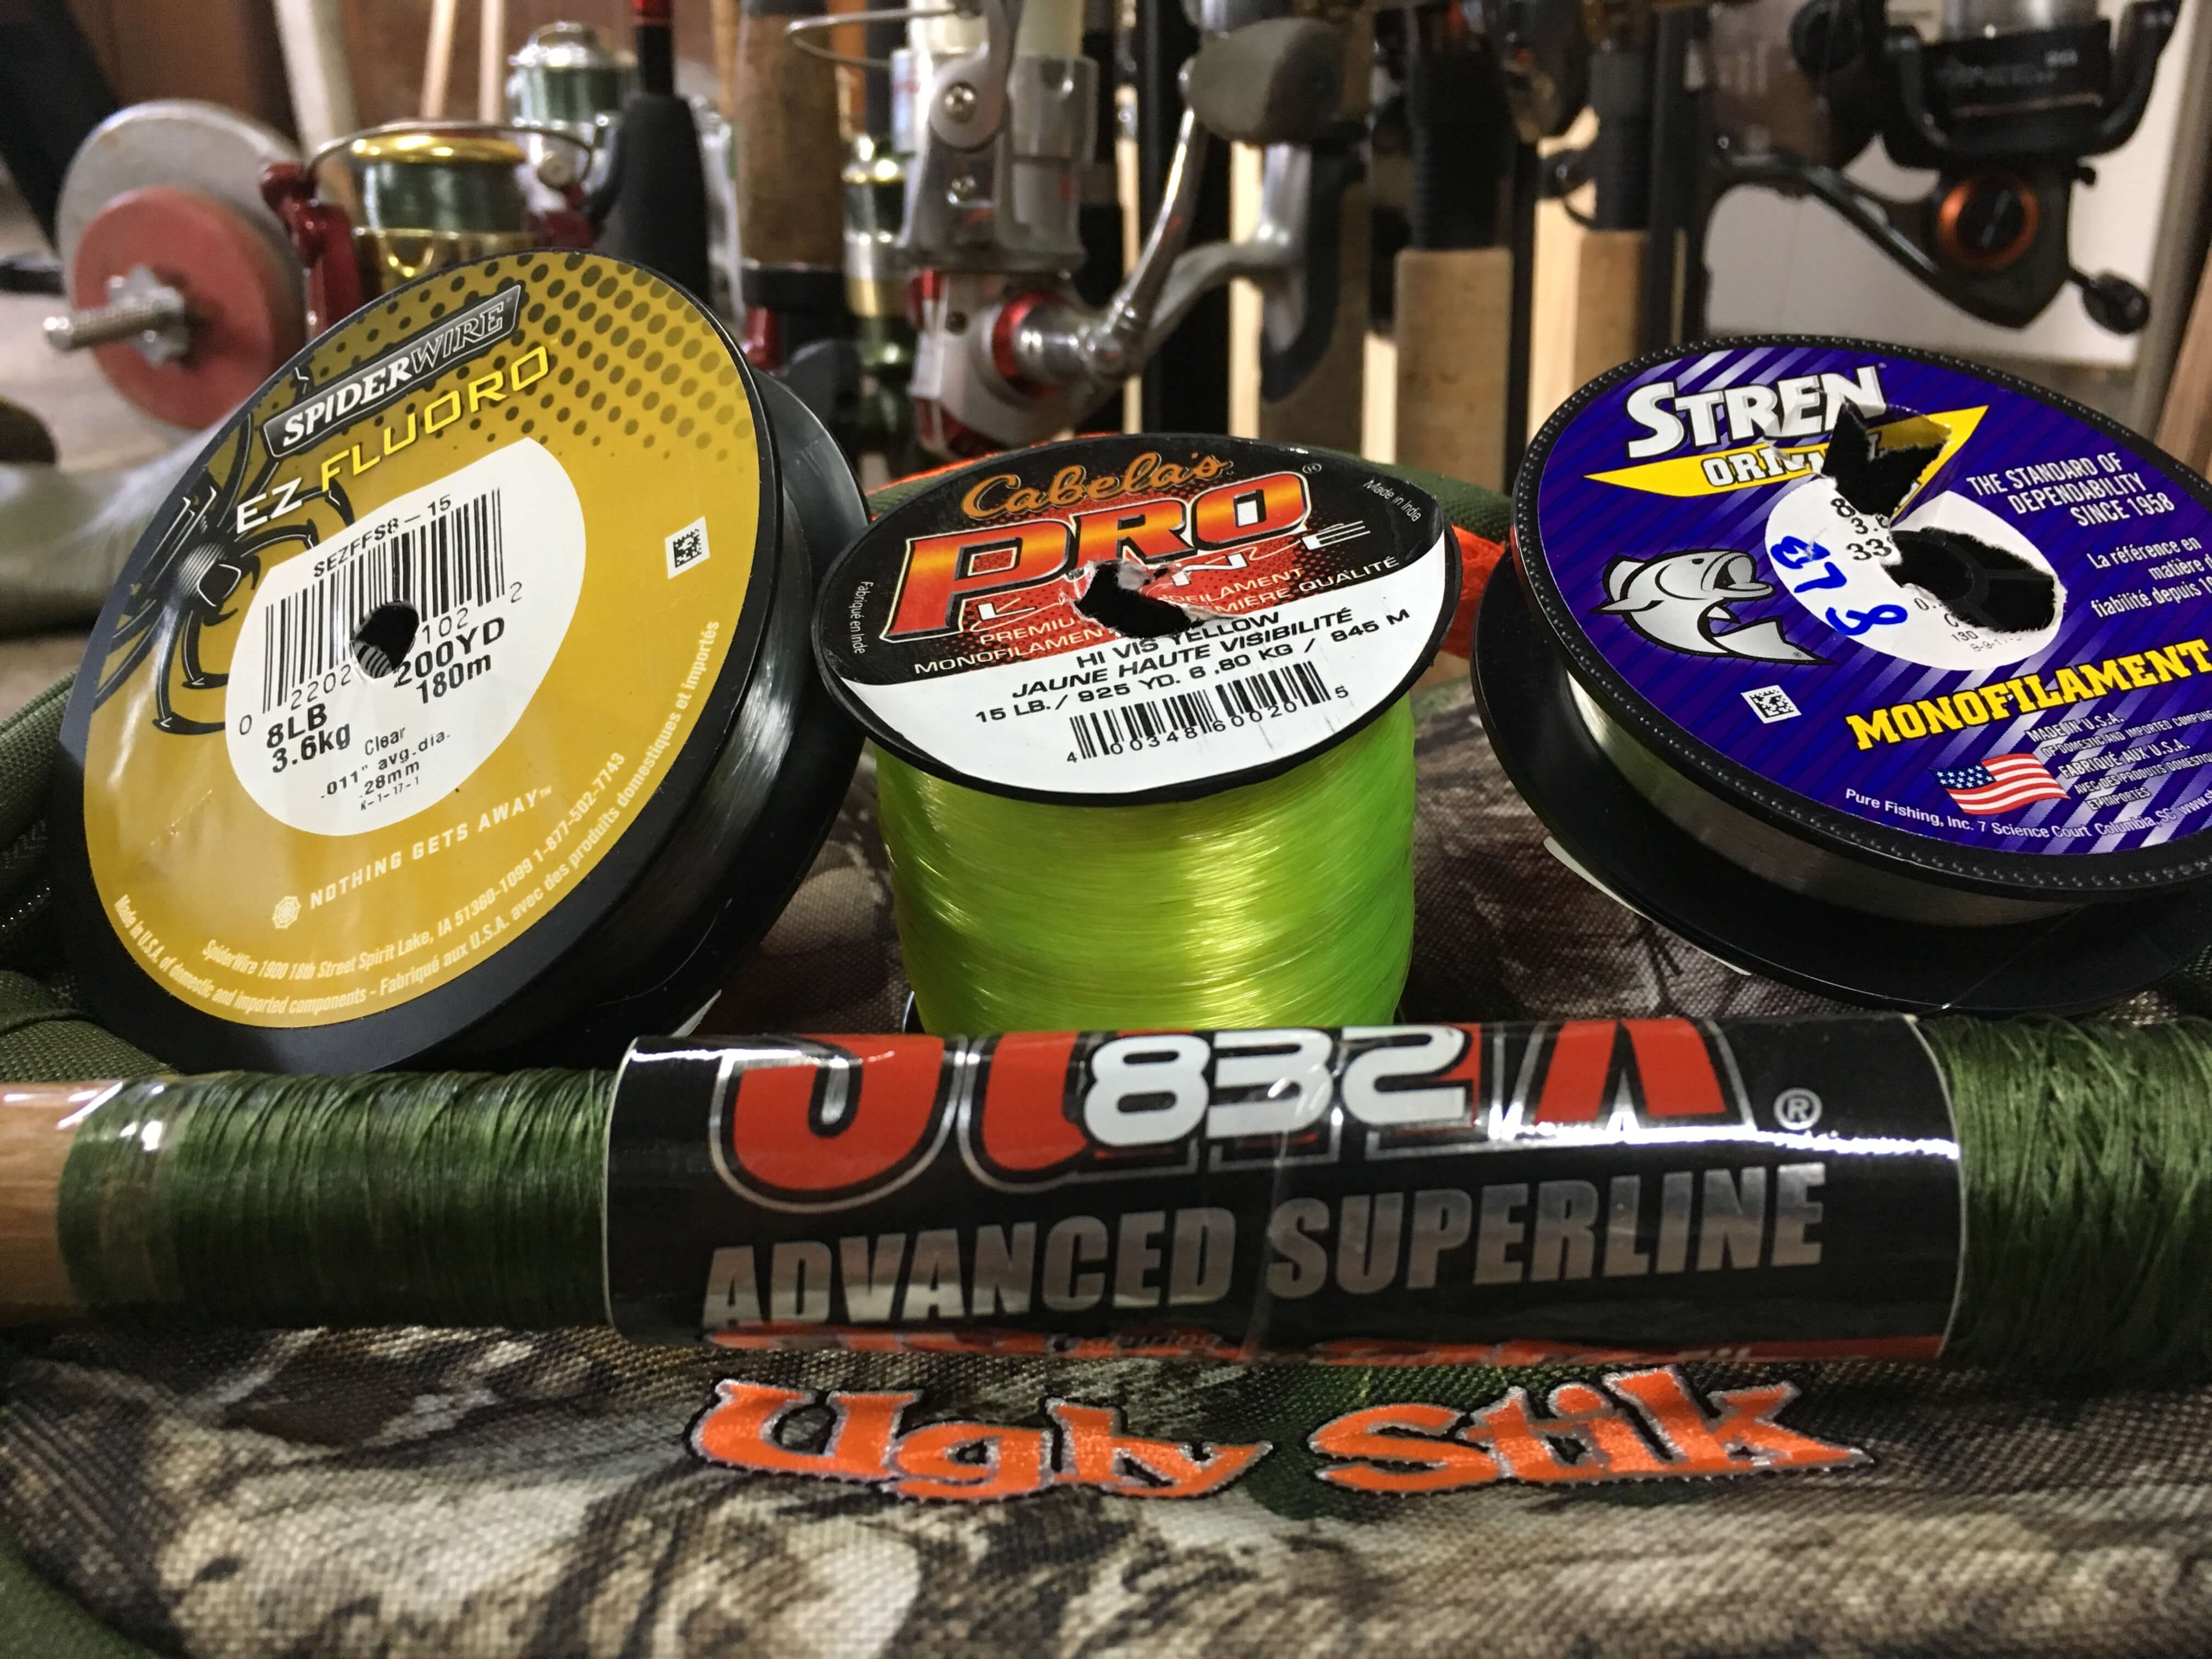 Choosing the right fishing line for the situation